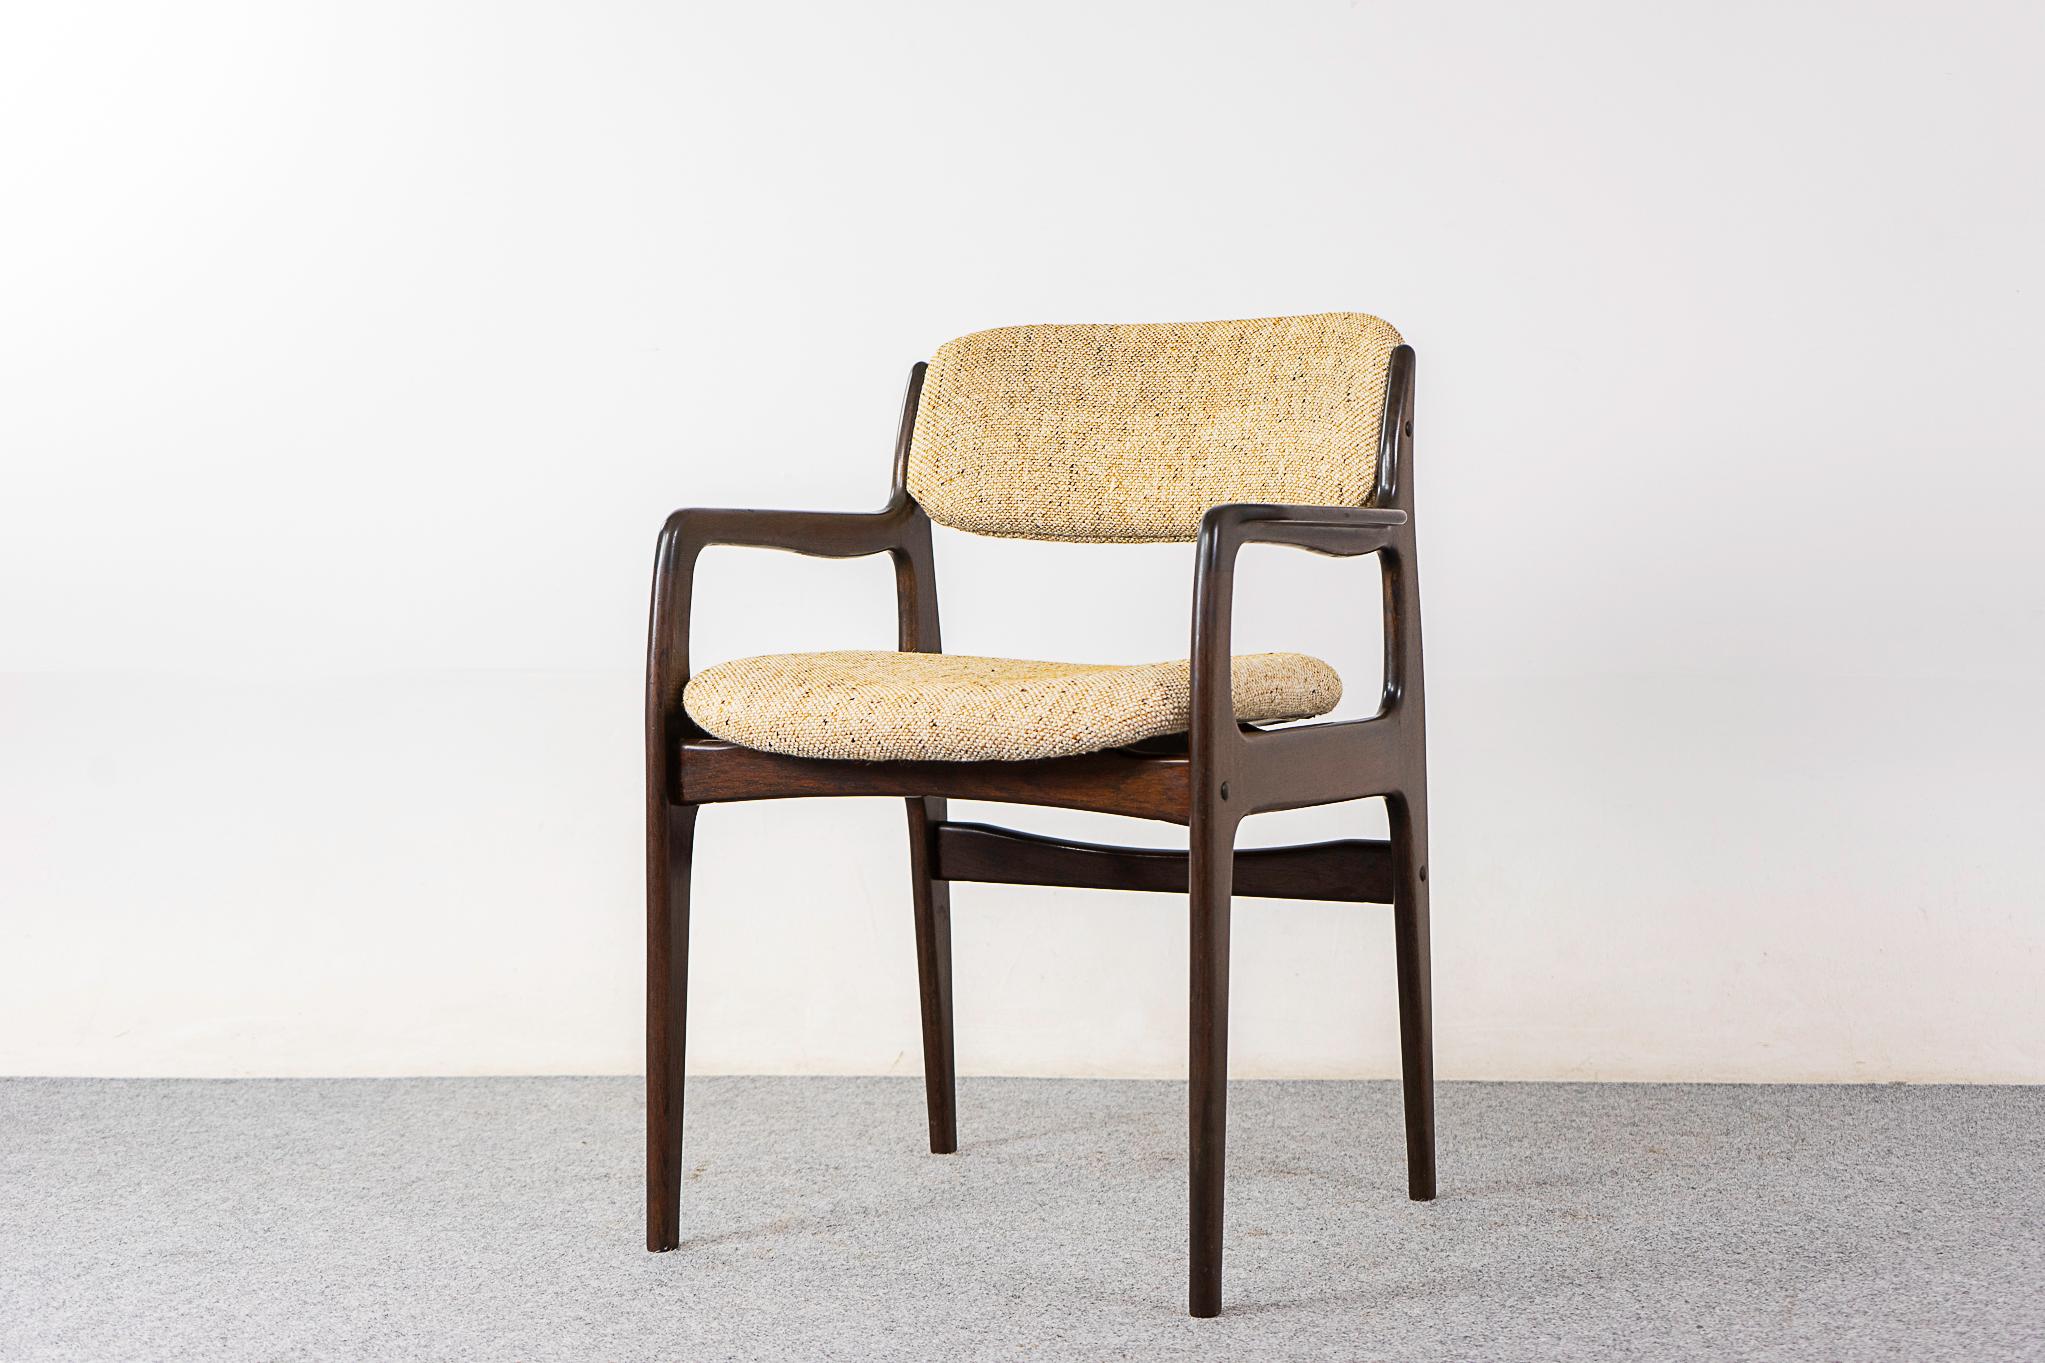 Oak arm chair, circa 1970's. Stained solid oak frame, original upholstery with minor wear. 